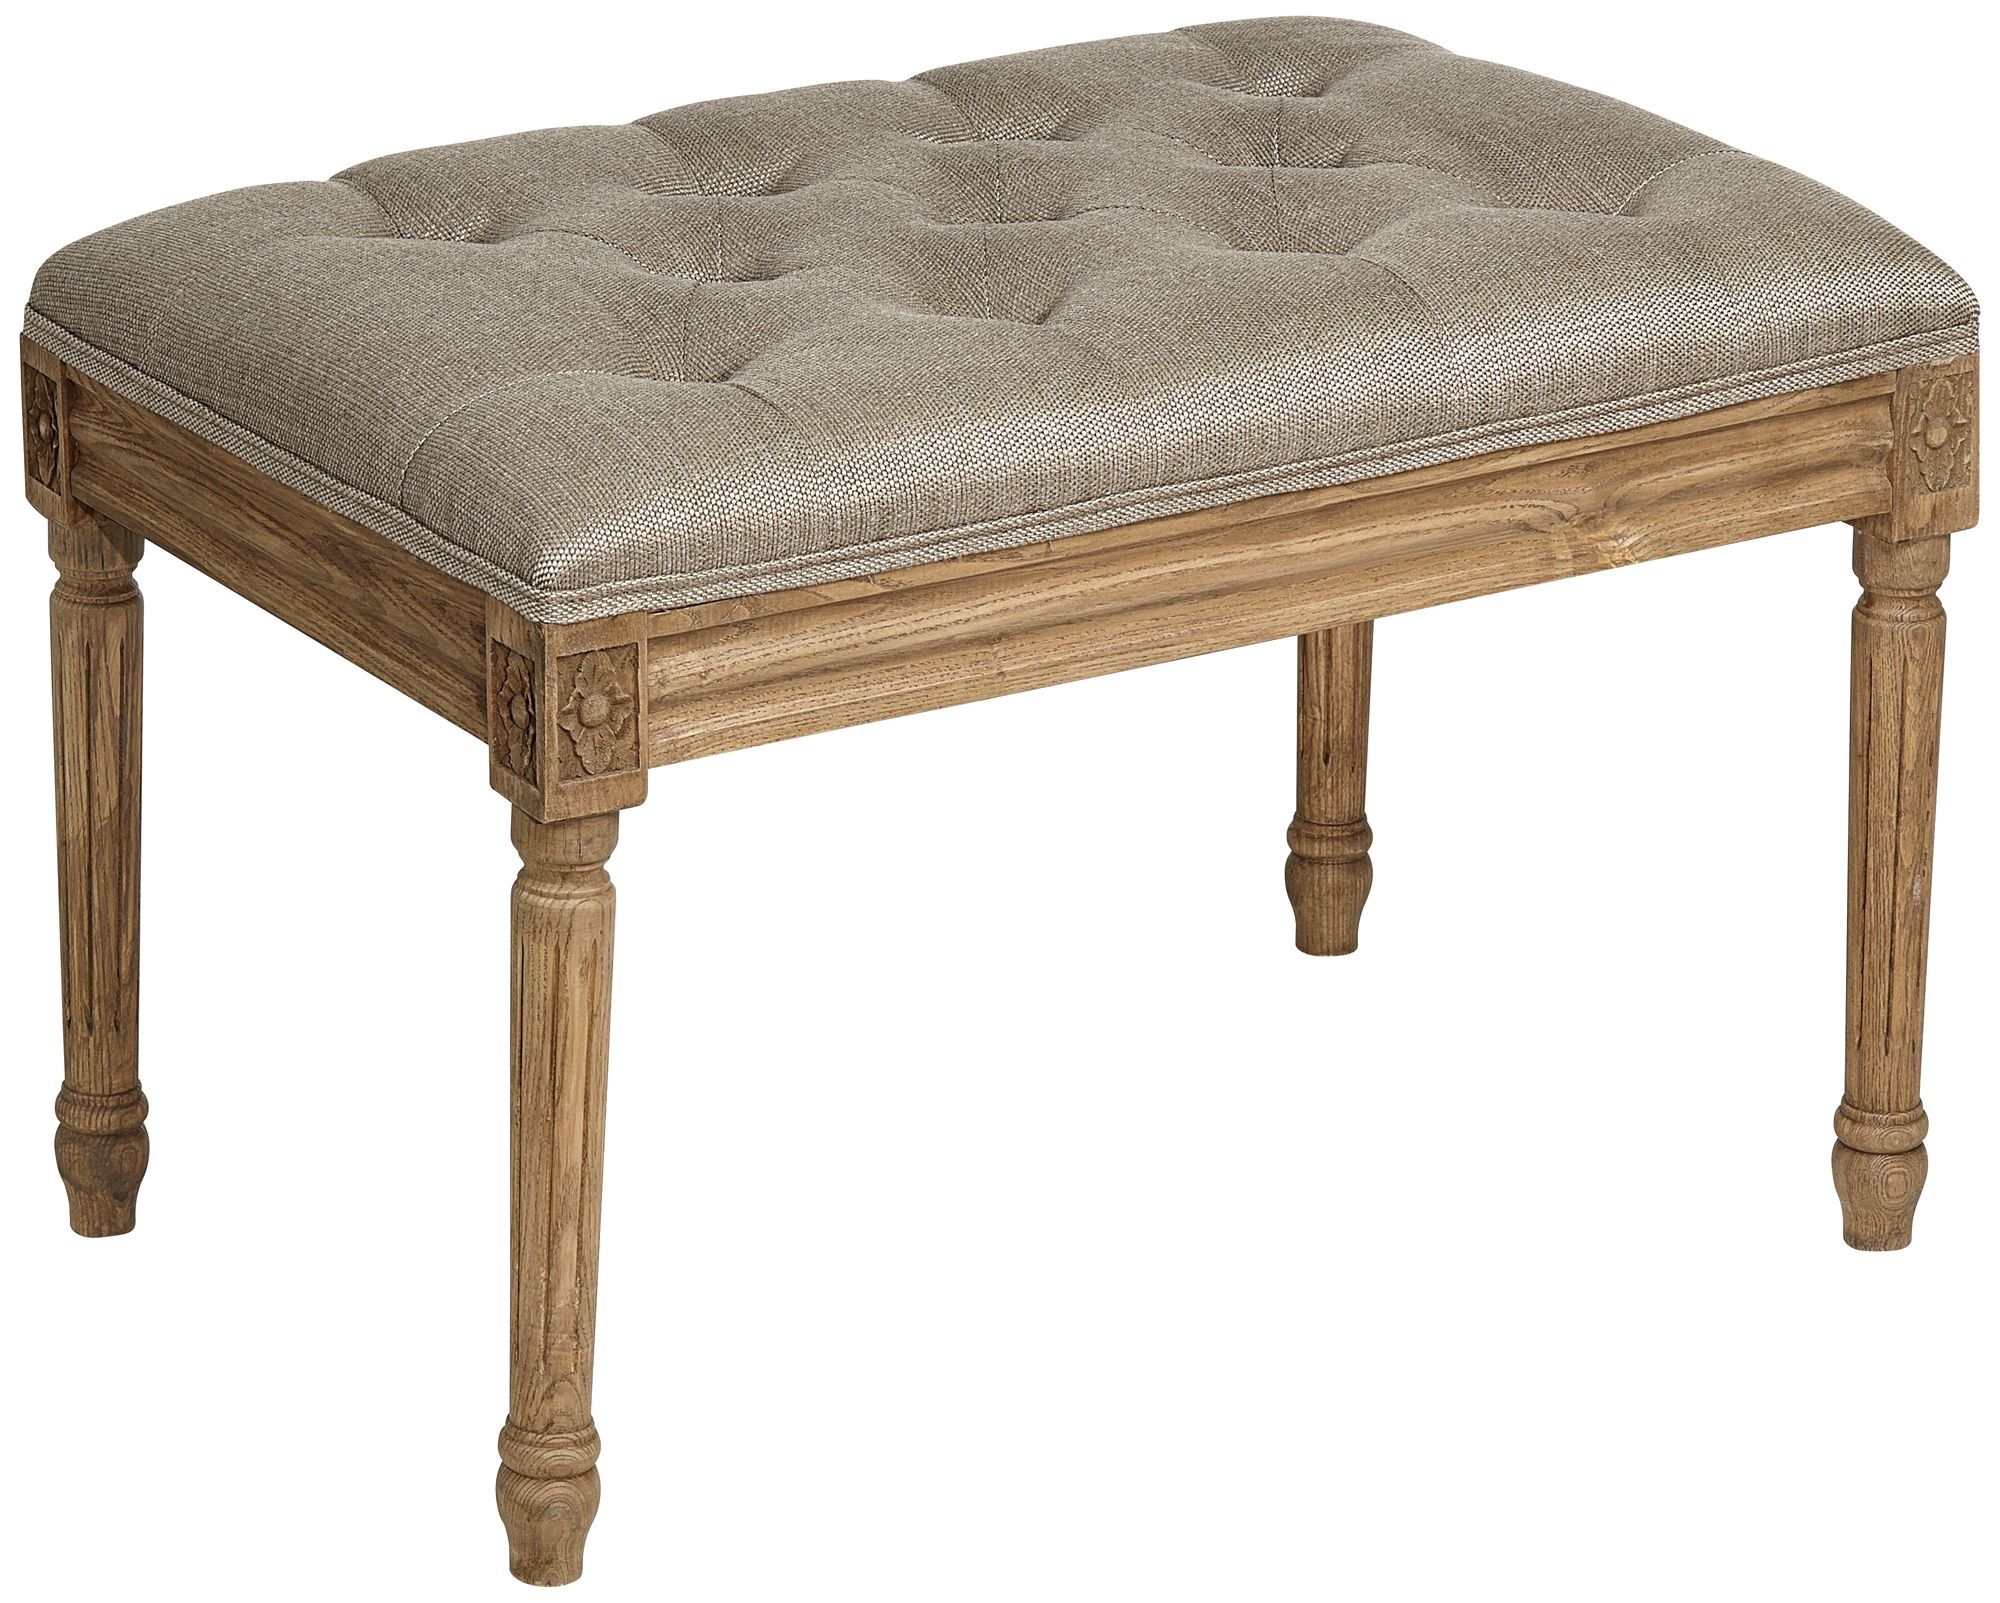 Suffolk Beige Ash Wood Tufted Bench - Style # 3M990 - Image 0